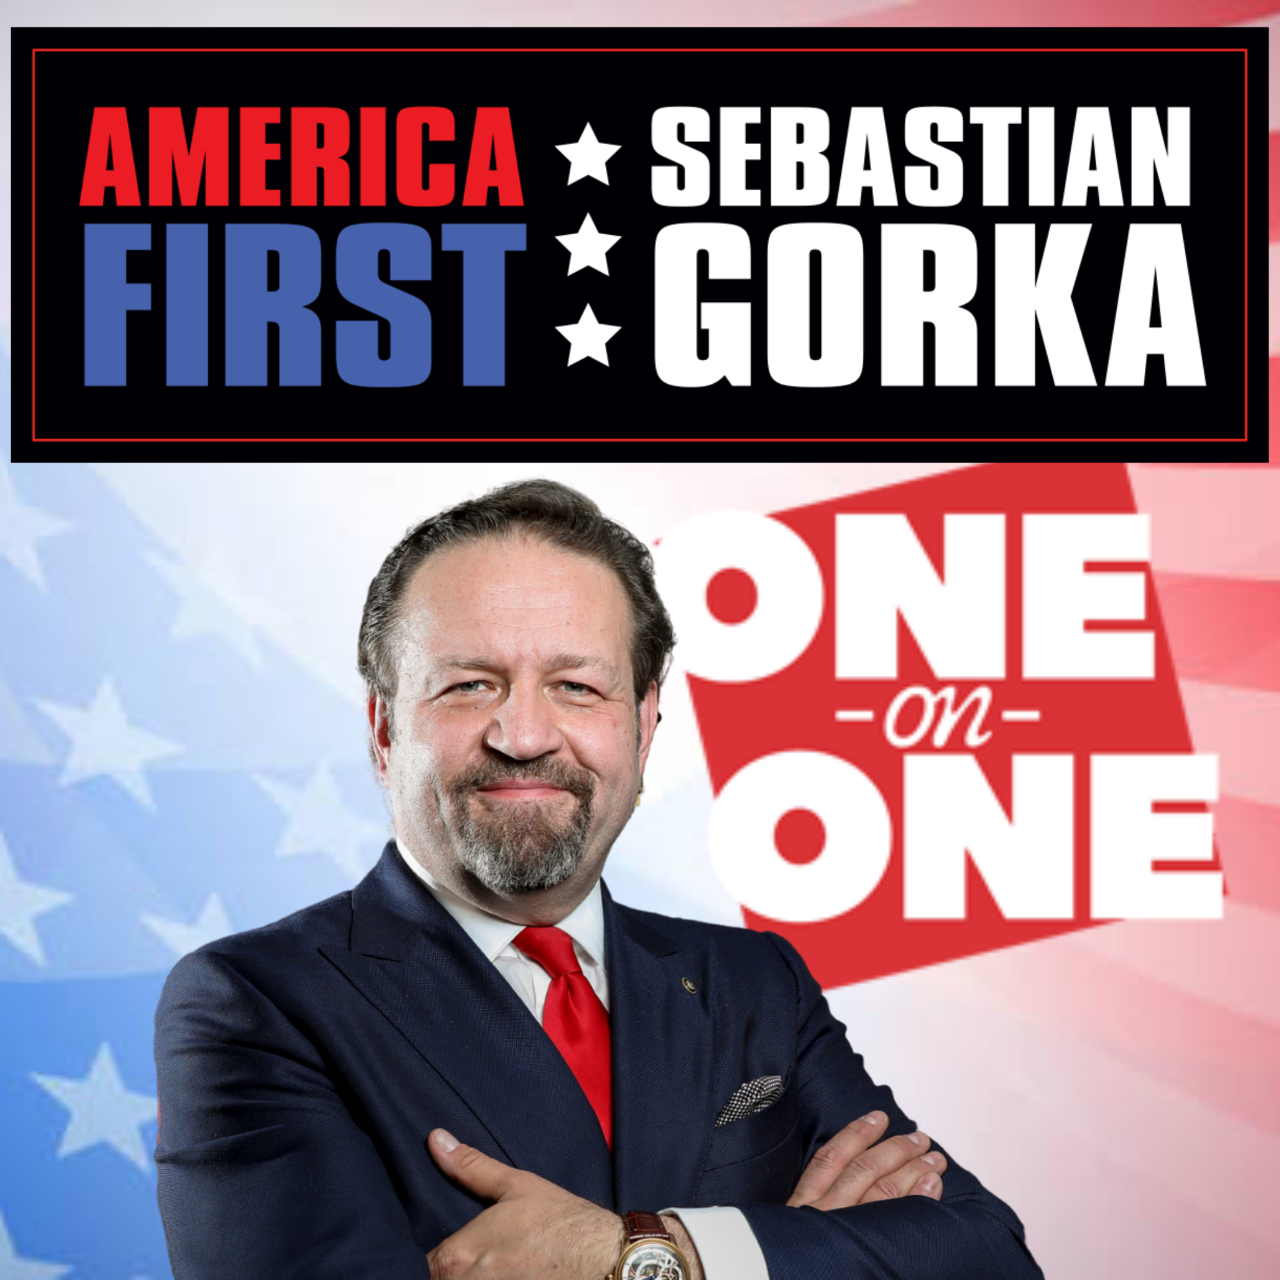 Can conservatives tell stories? Chris Kohls on America First One on One